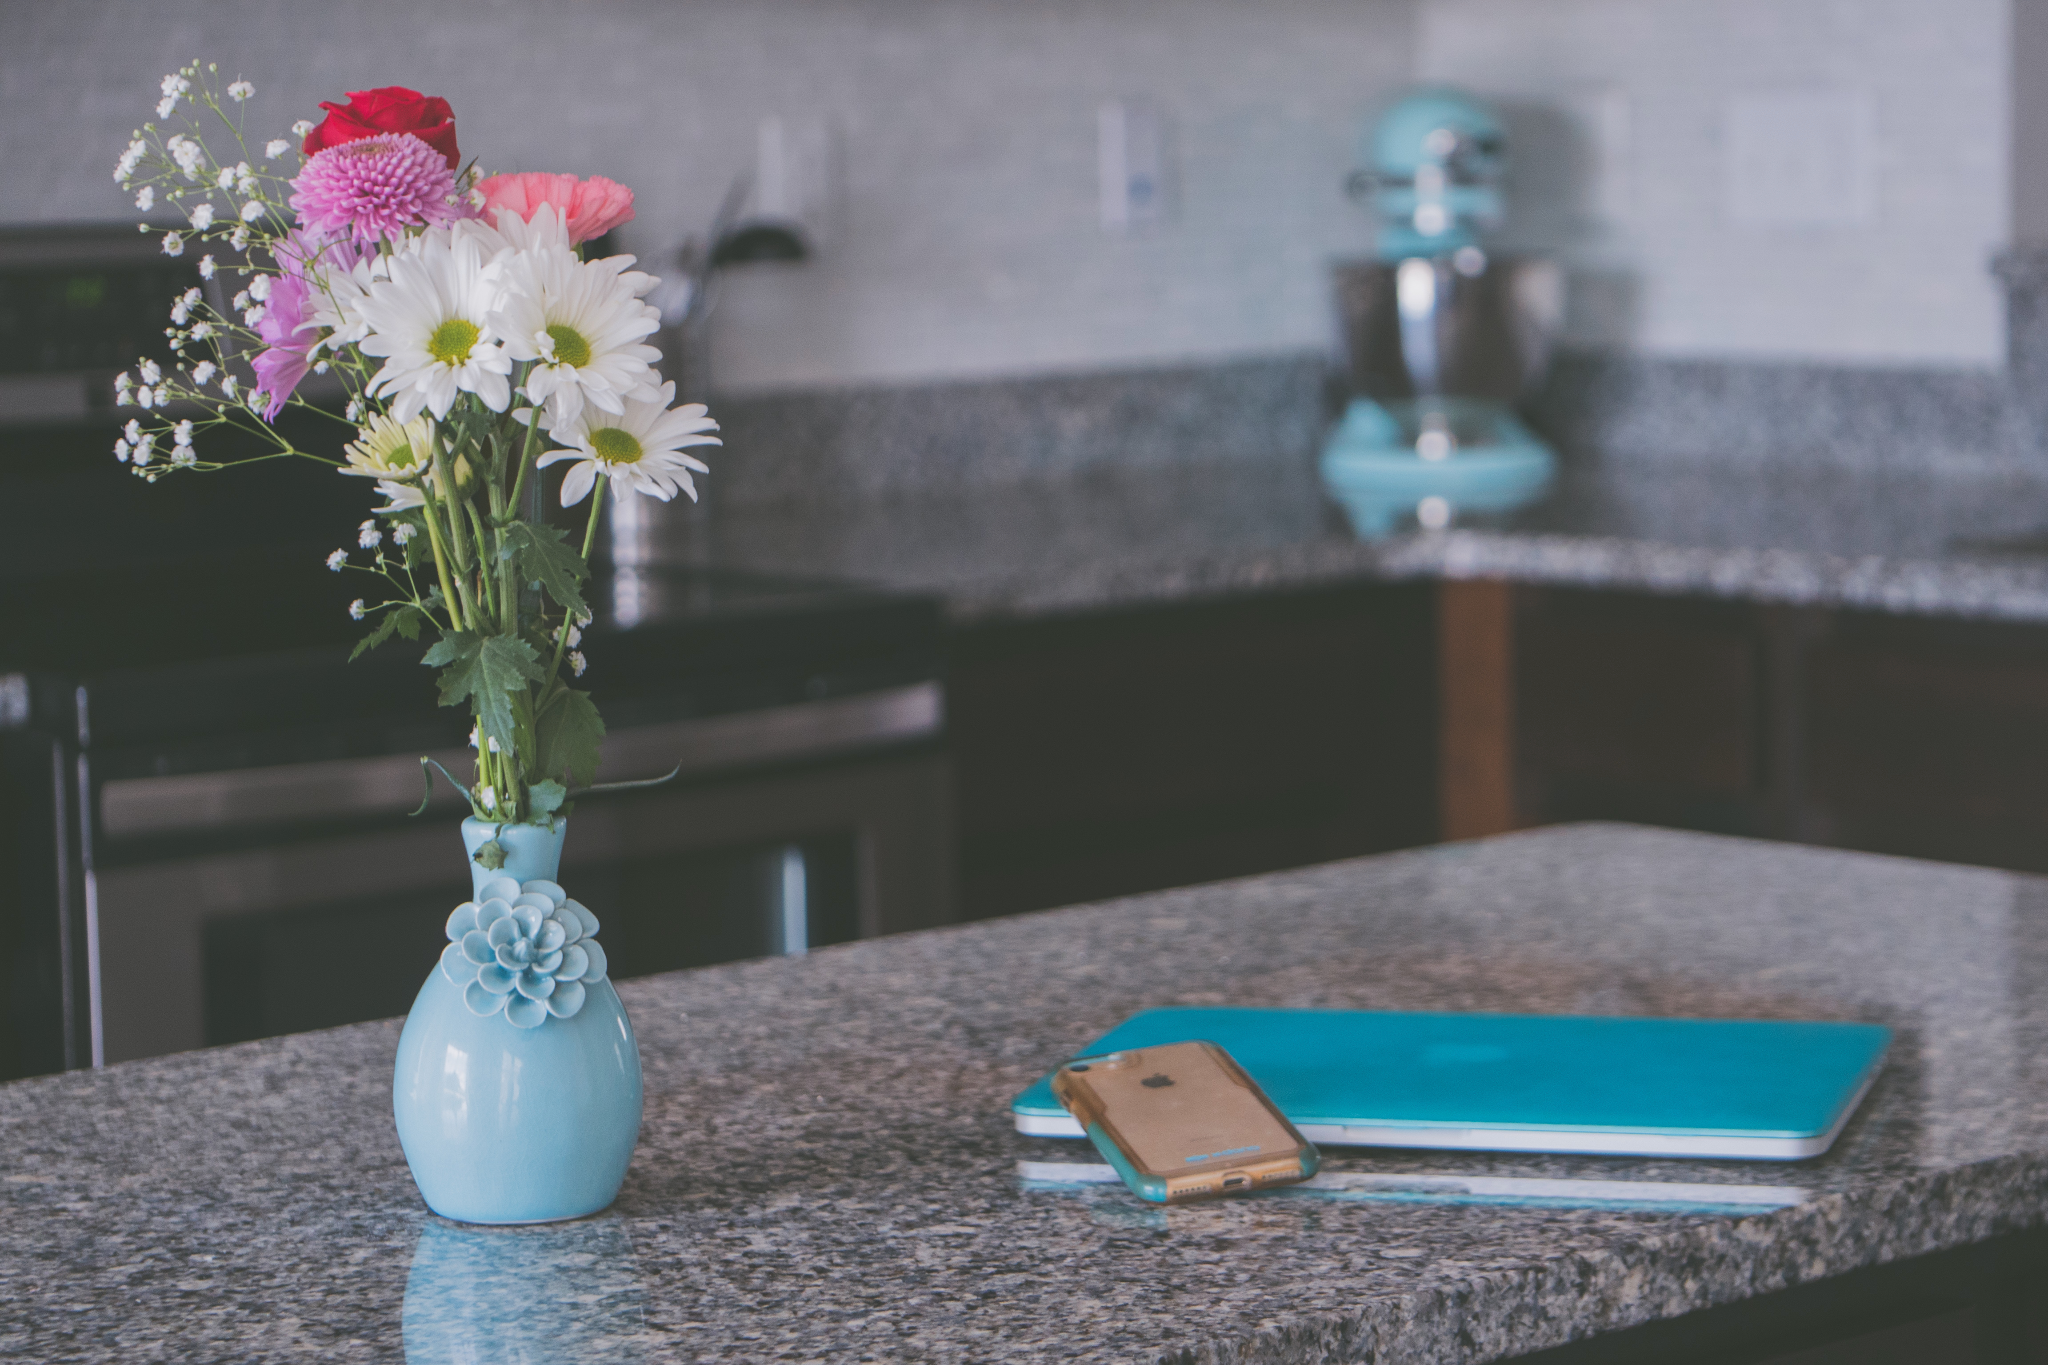 Do granite countertops increase the value of a rental property?